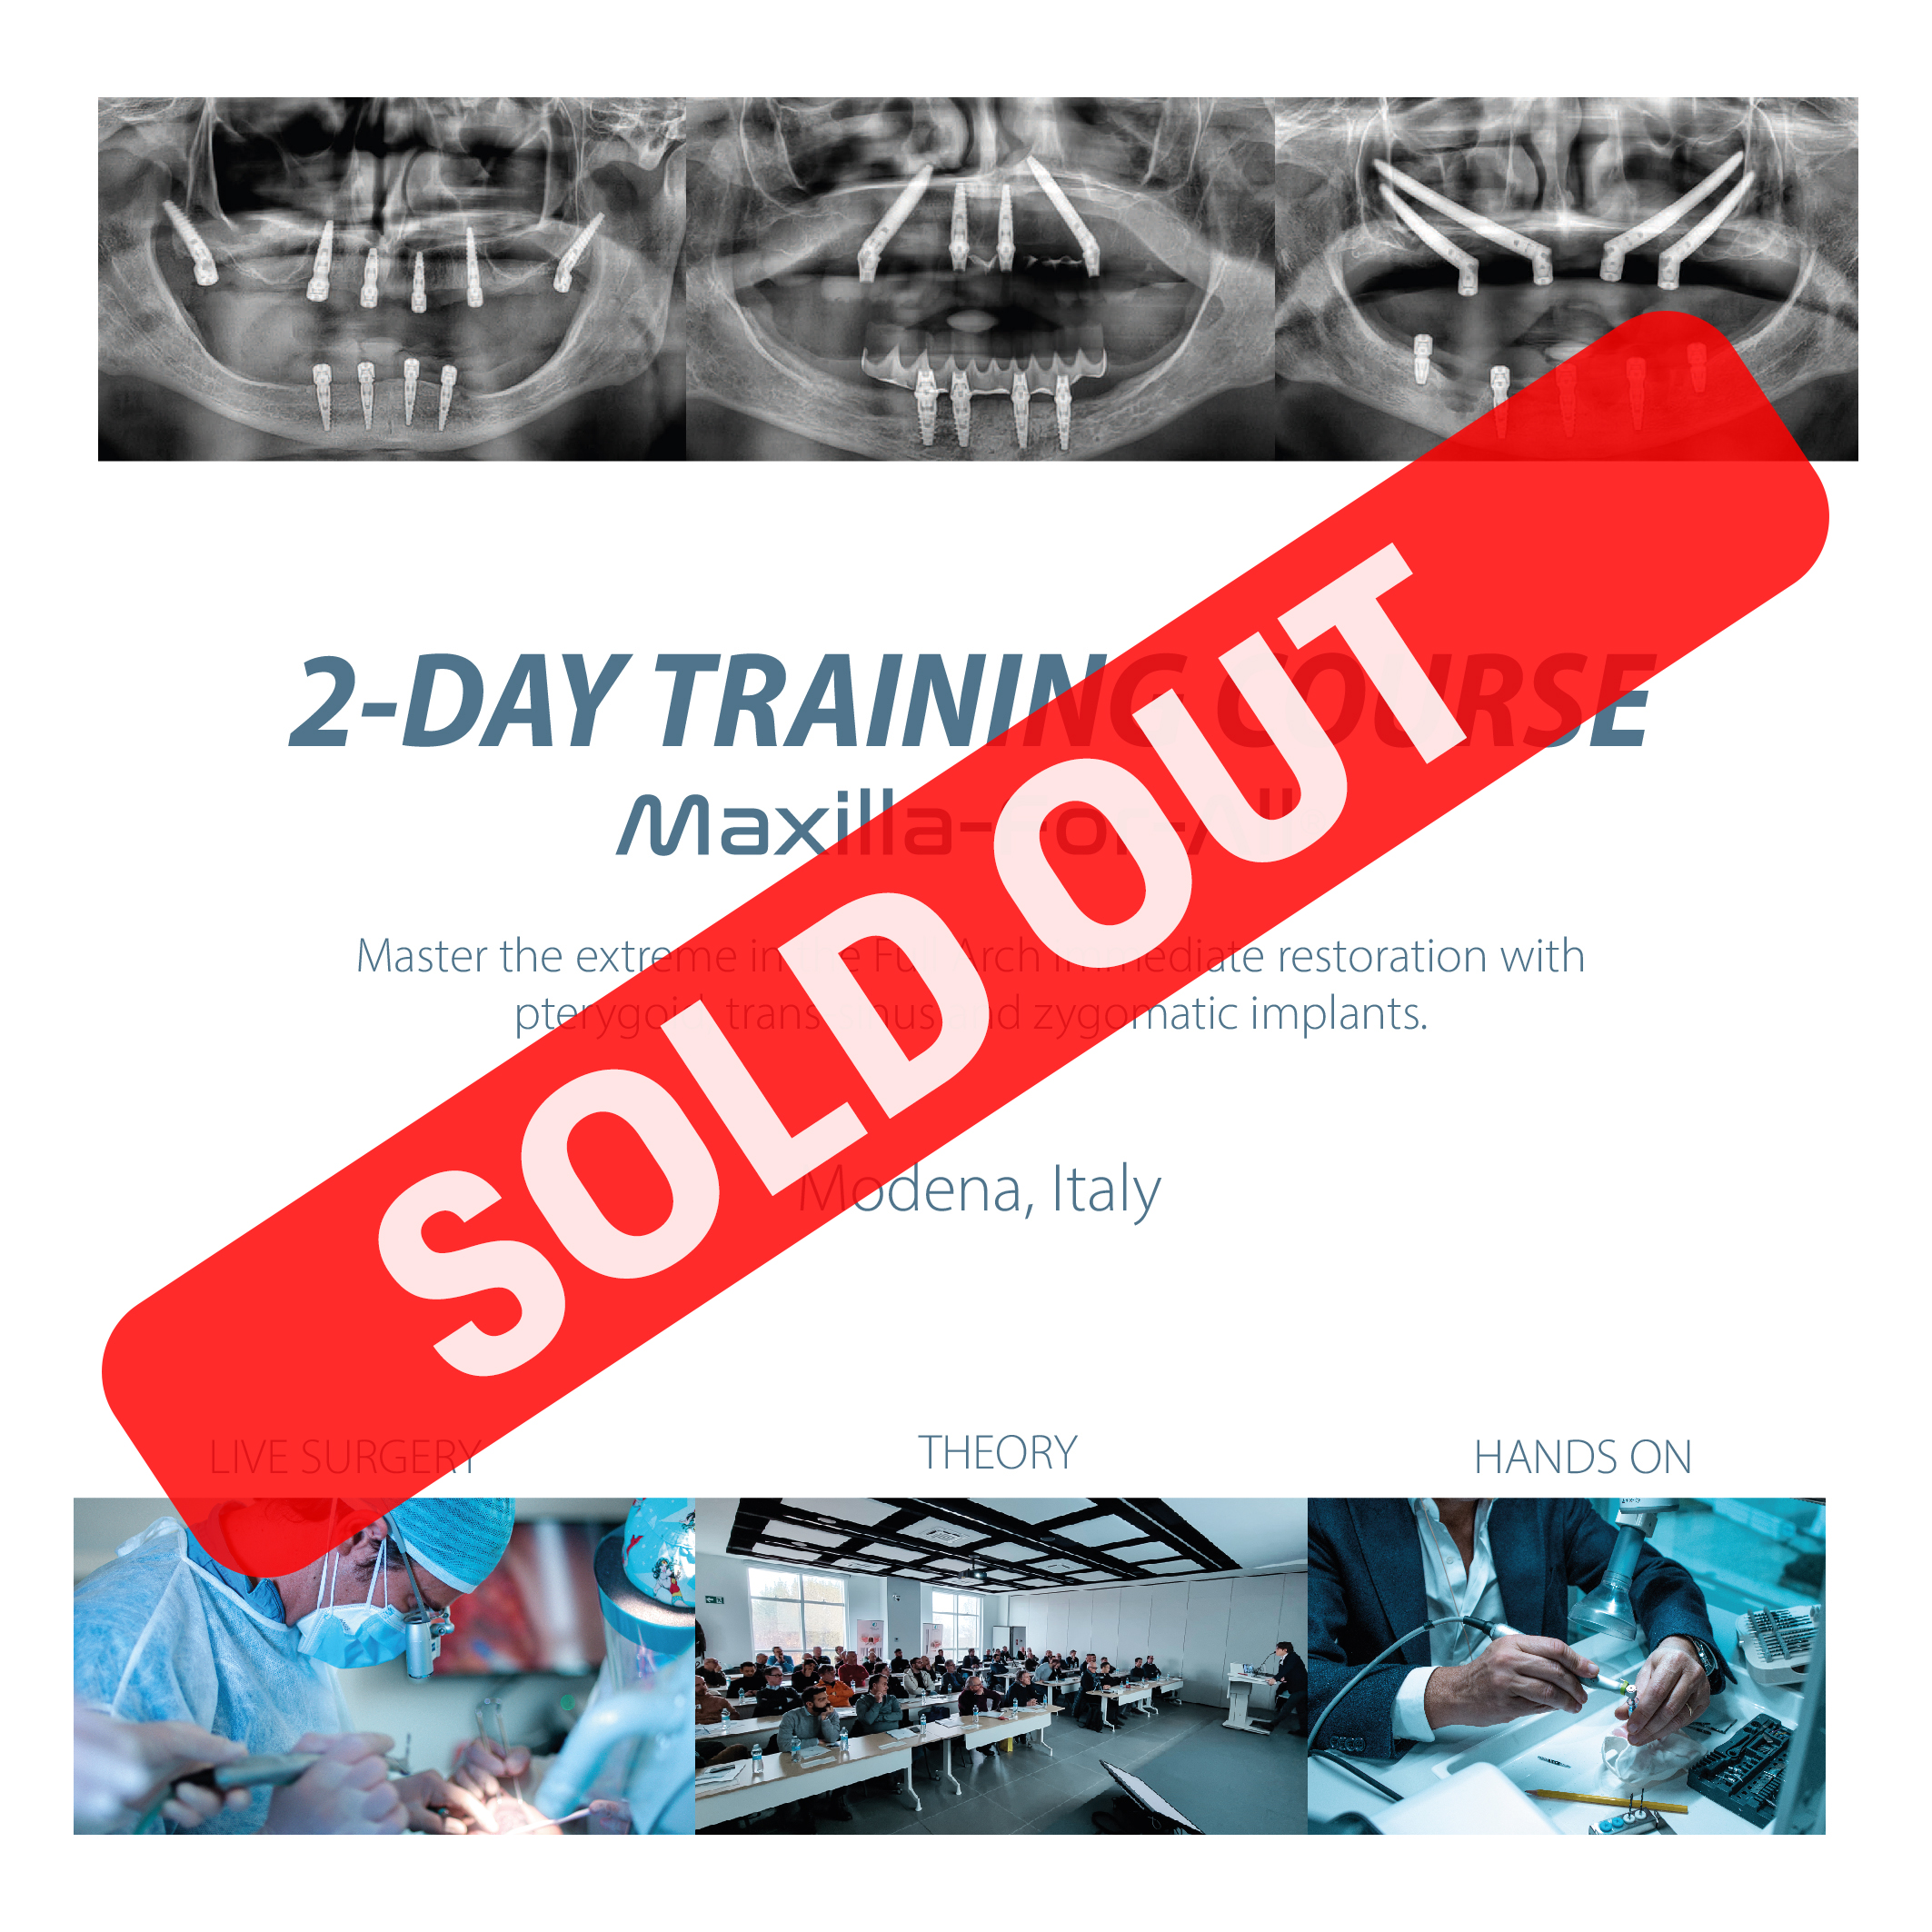 2-day training course «Maxilla-For-All»